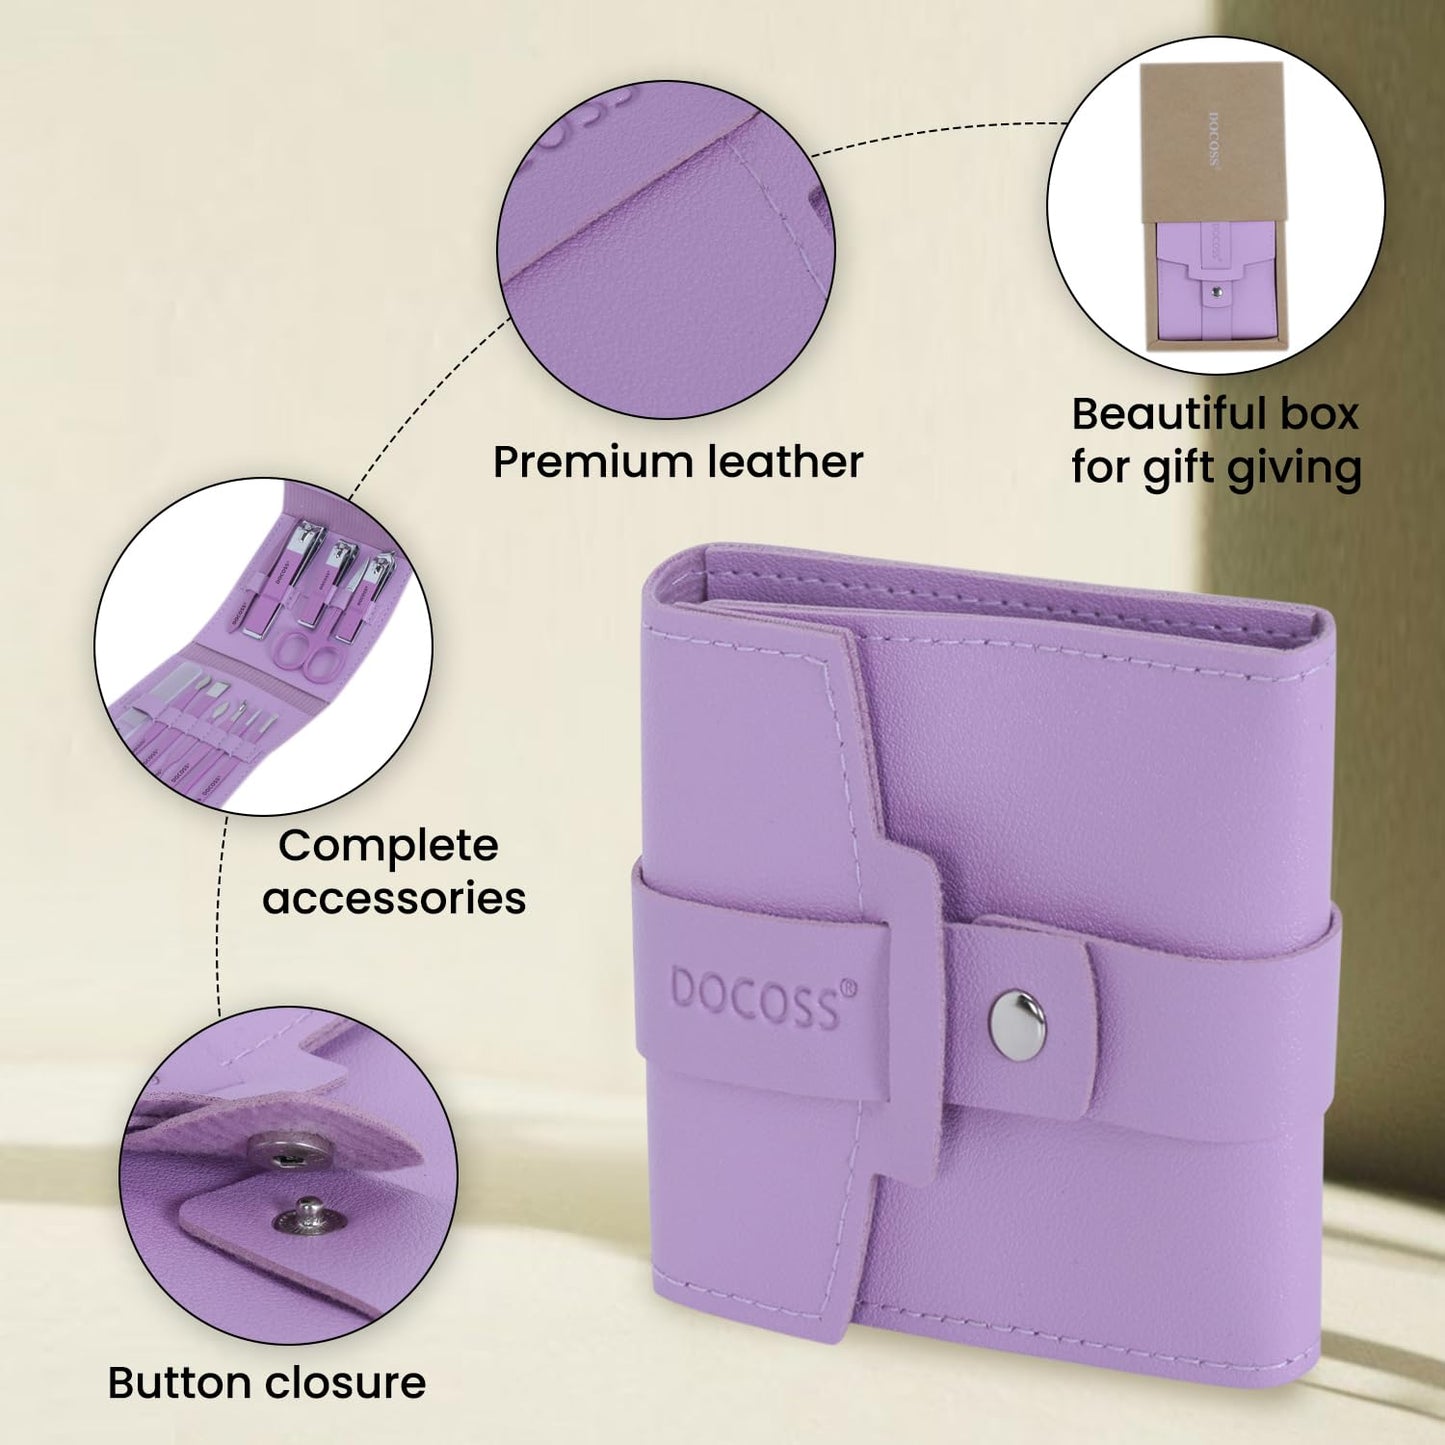 DOCOSS Manicure Kit For Women,Nail Cutter Kit For Women/Girls With Leather Pouch for Manicure Pedicure kit with Acne needle,Nail Cllippers And Tools (Purple Lilac)